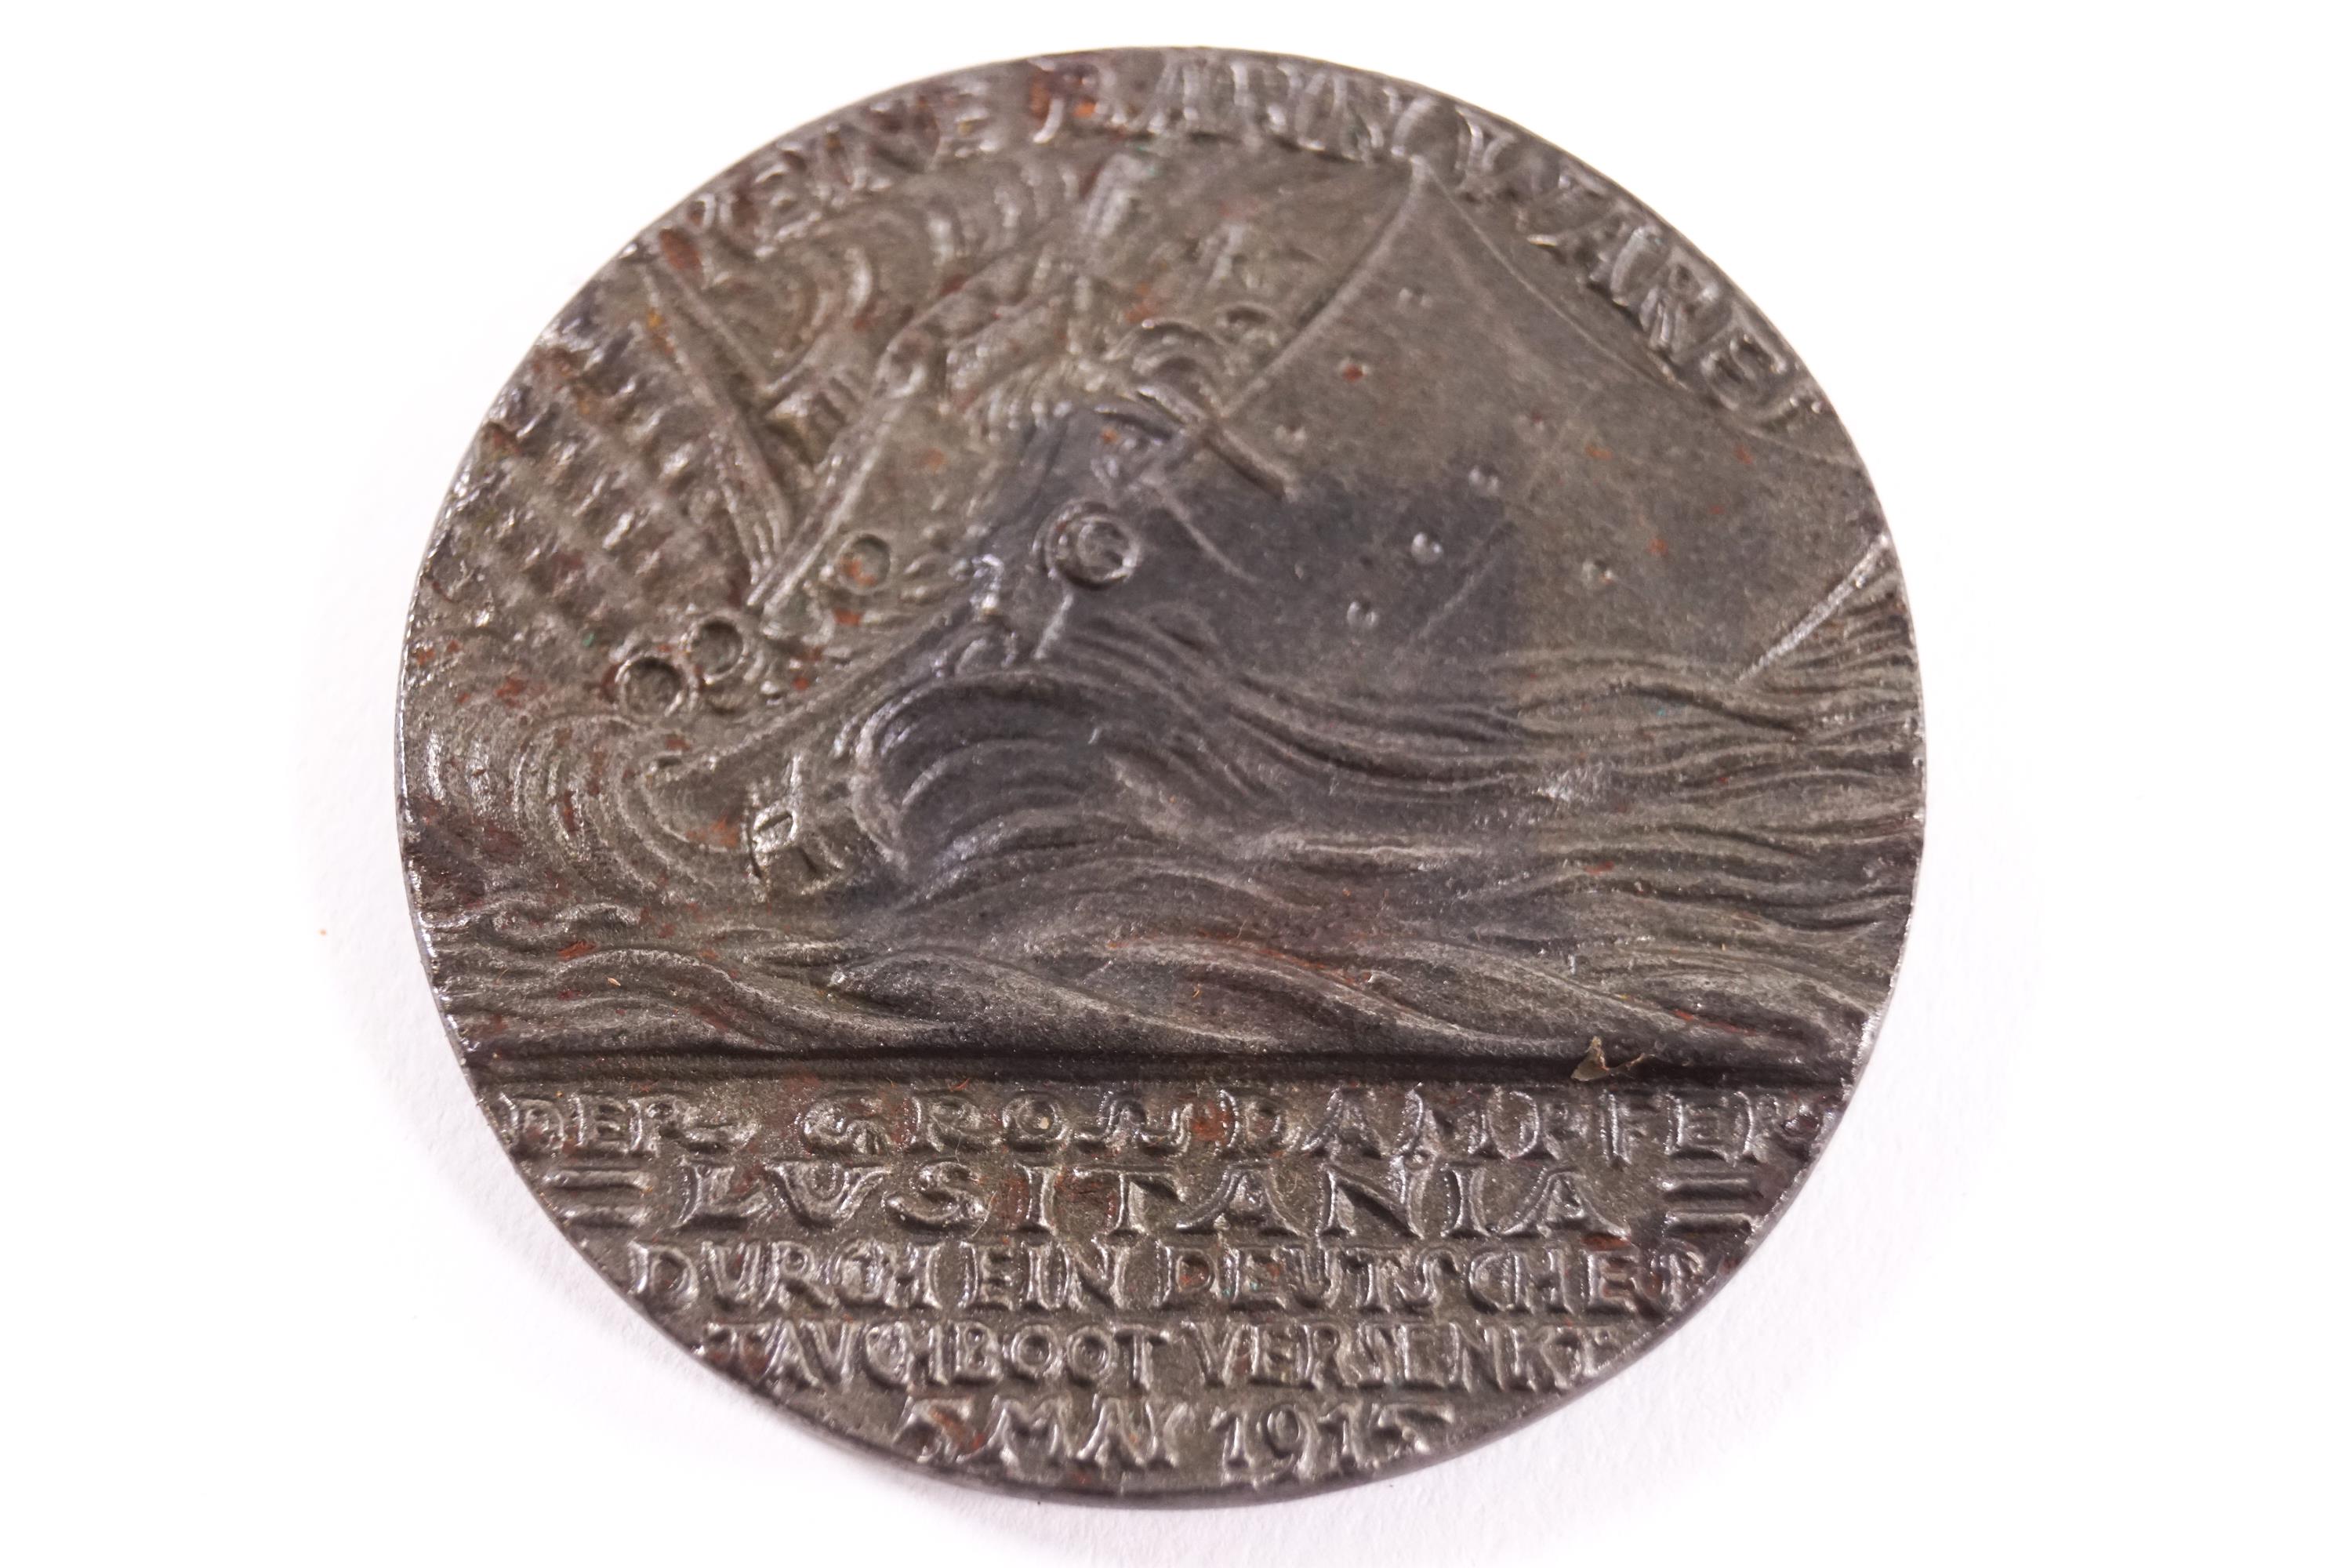 A Lusitania medal (replica) commemorating her sinking in 1915, in original box - Image 2 of 3